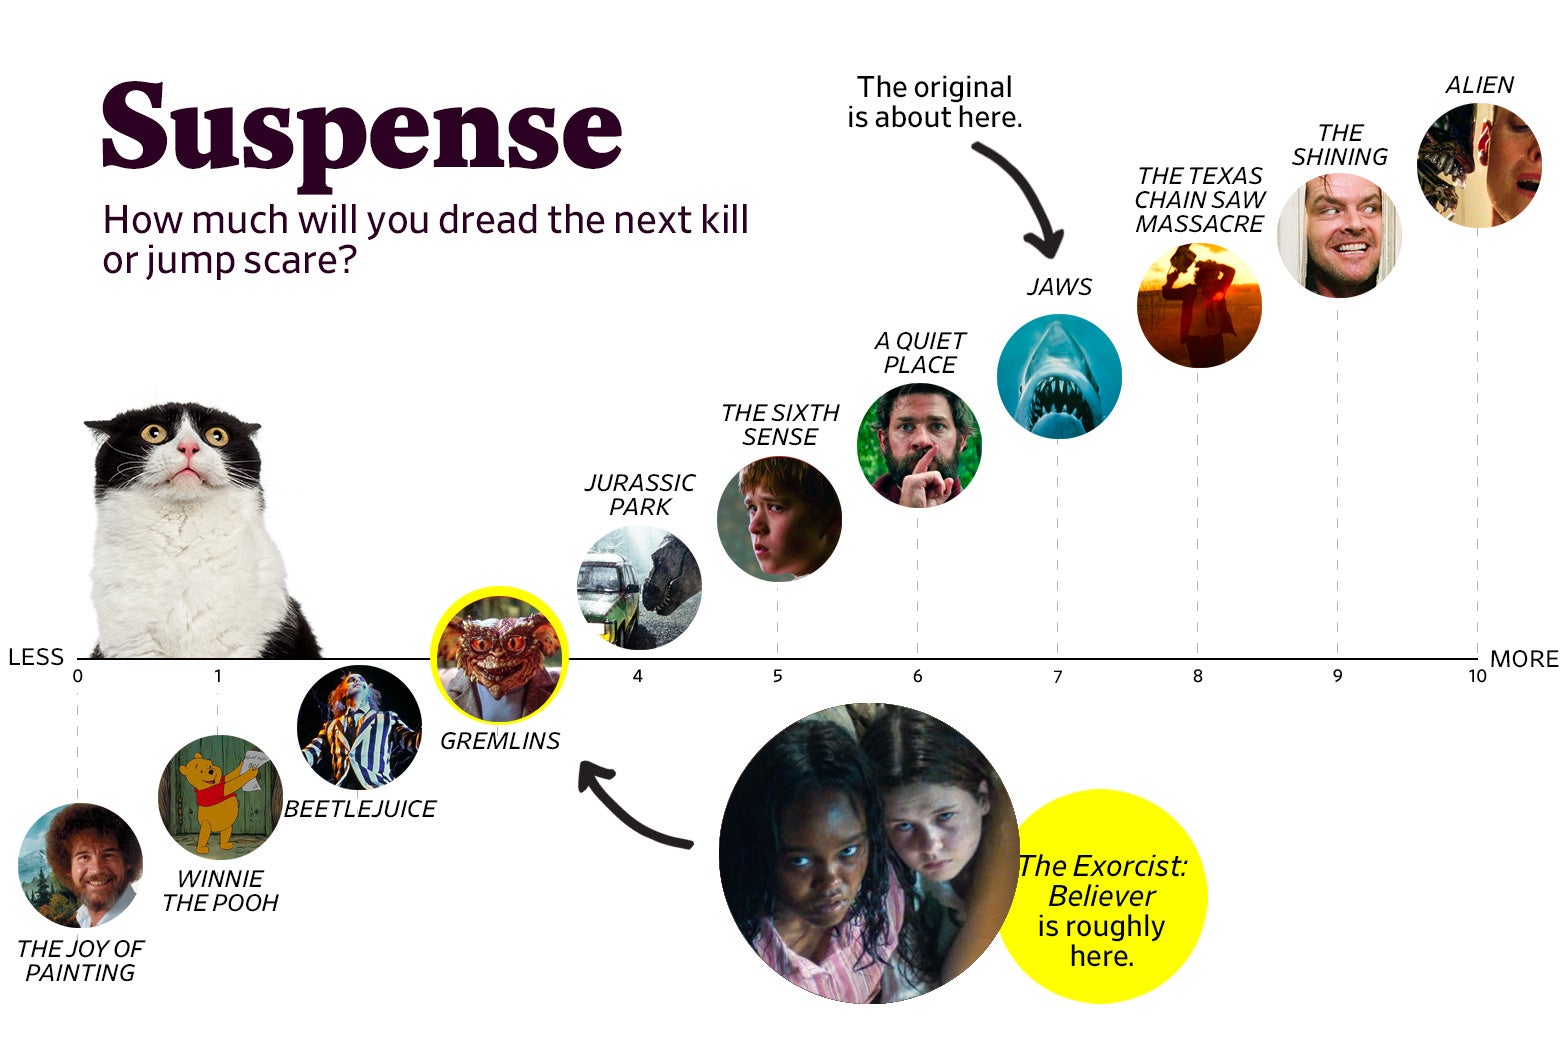 A chart titled “Suspense: How much will you dread the next kill or jump scare?” shows that The Exorcist: Believer ranks a 3 in suspense, roughly the same as Gremlins, while the original Exorcist rates a 7, roughly the same as Jaws. The scale ranges from The Joy of Painting (0) to Alien (10).